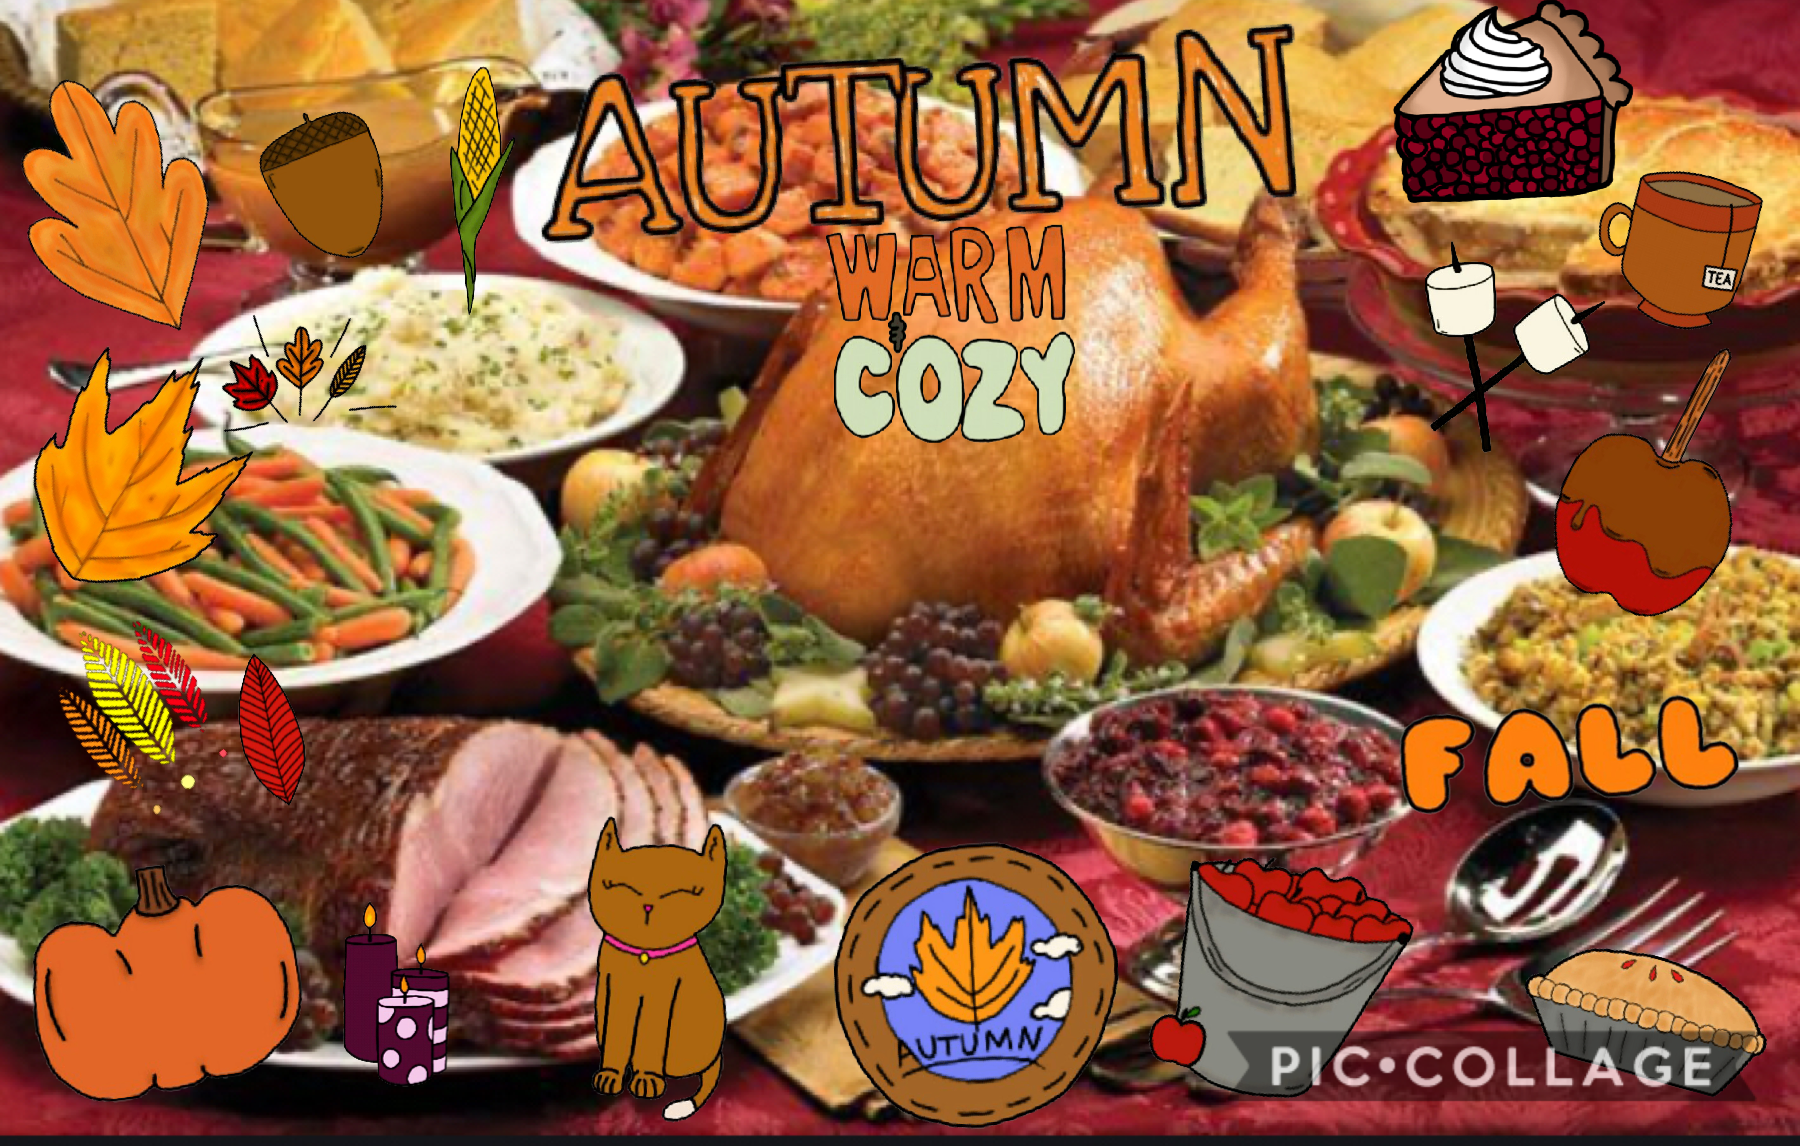 Like if you are excited for Thanksgiving!(By Thursday November 28)